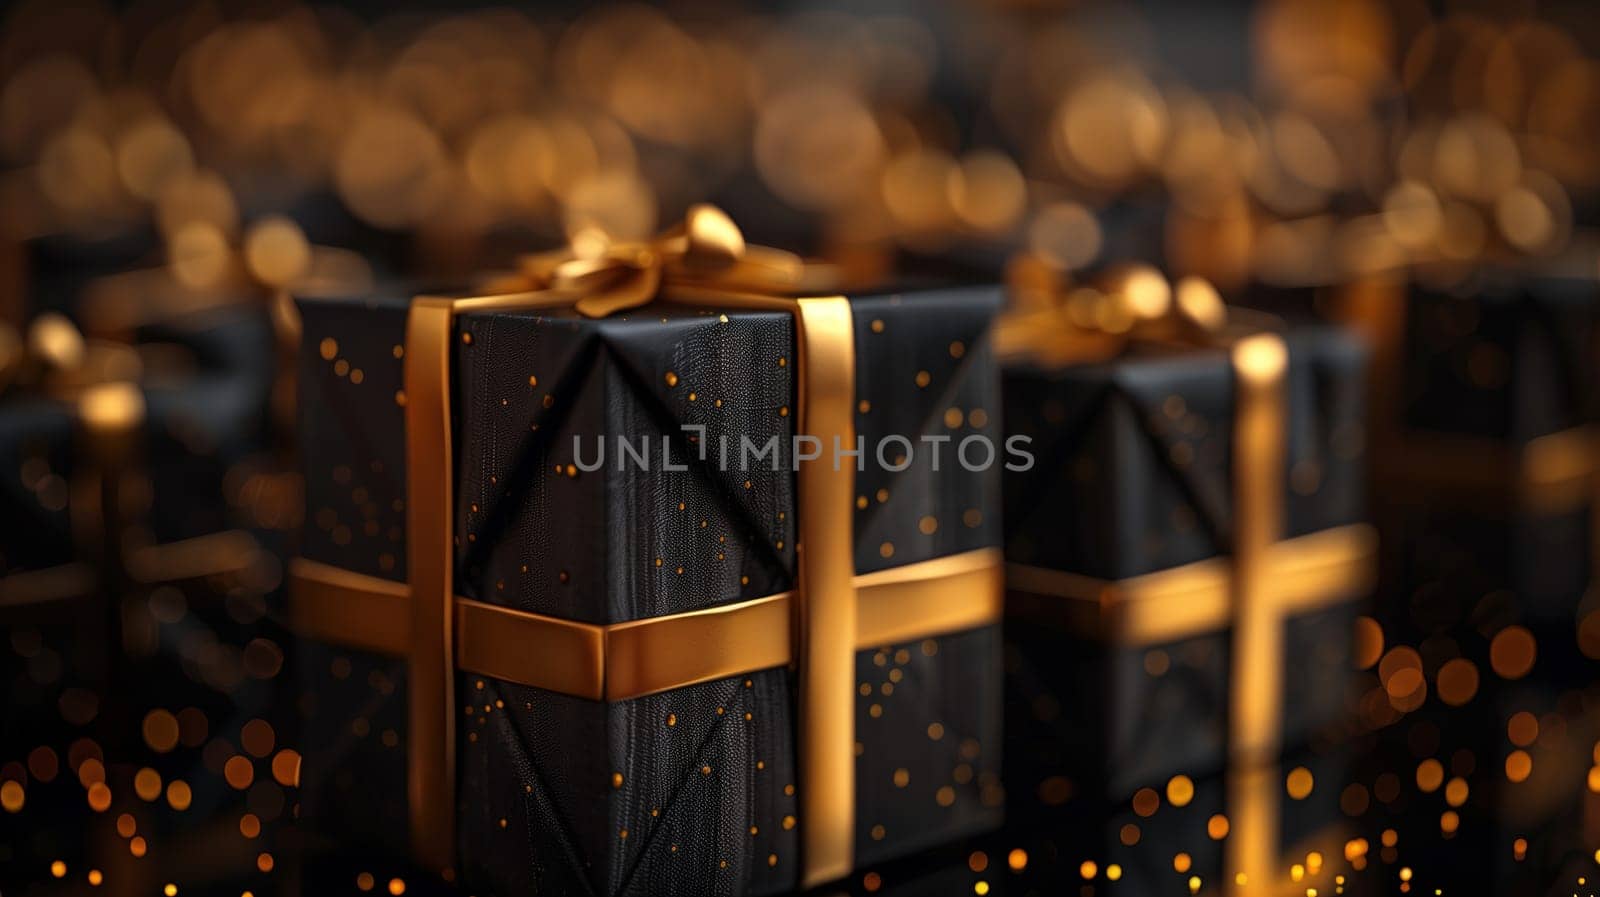 A collection of black and gold wrapped presents stacked neatly together. The shiny metallic wrapping paper reflects the light, creating a festive and elegant display for a sale or Black Friday event.